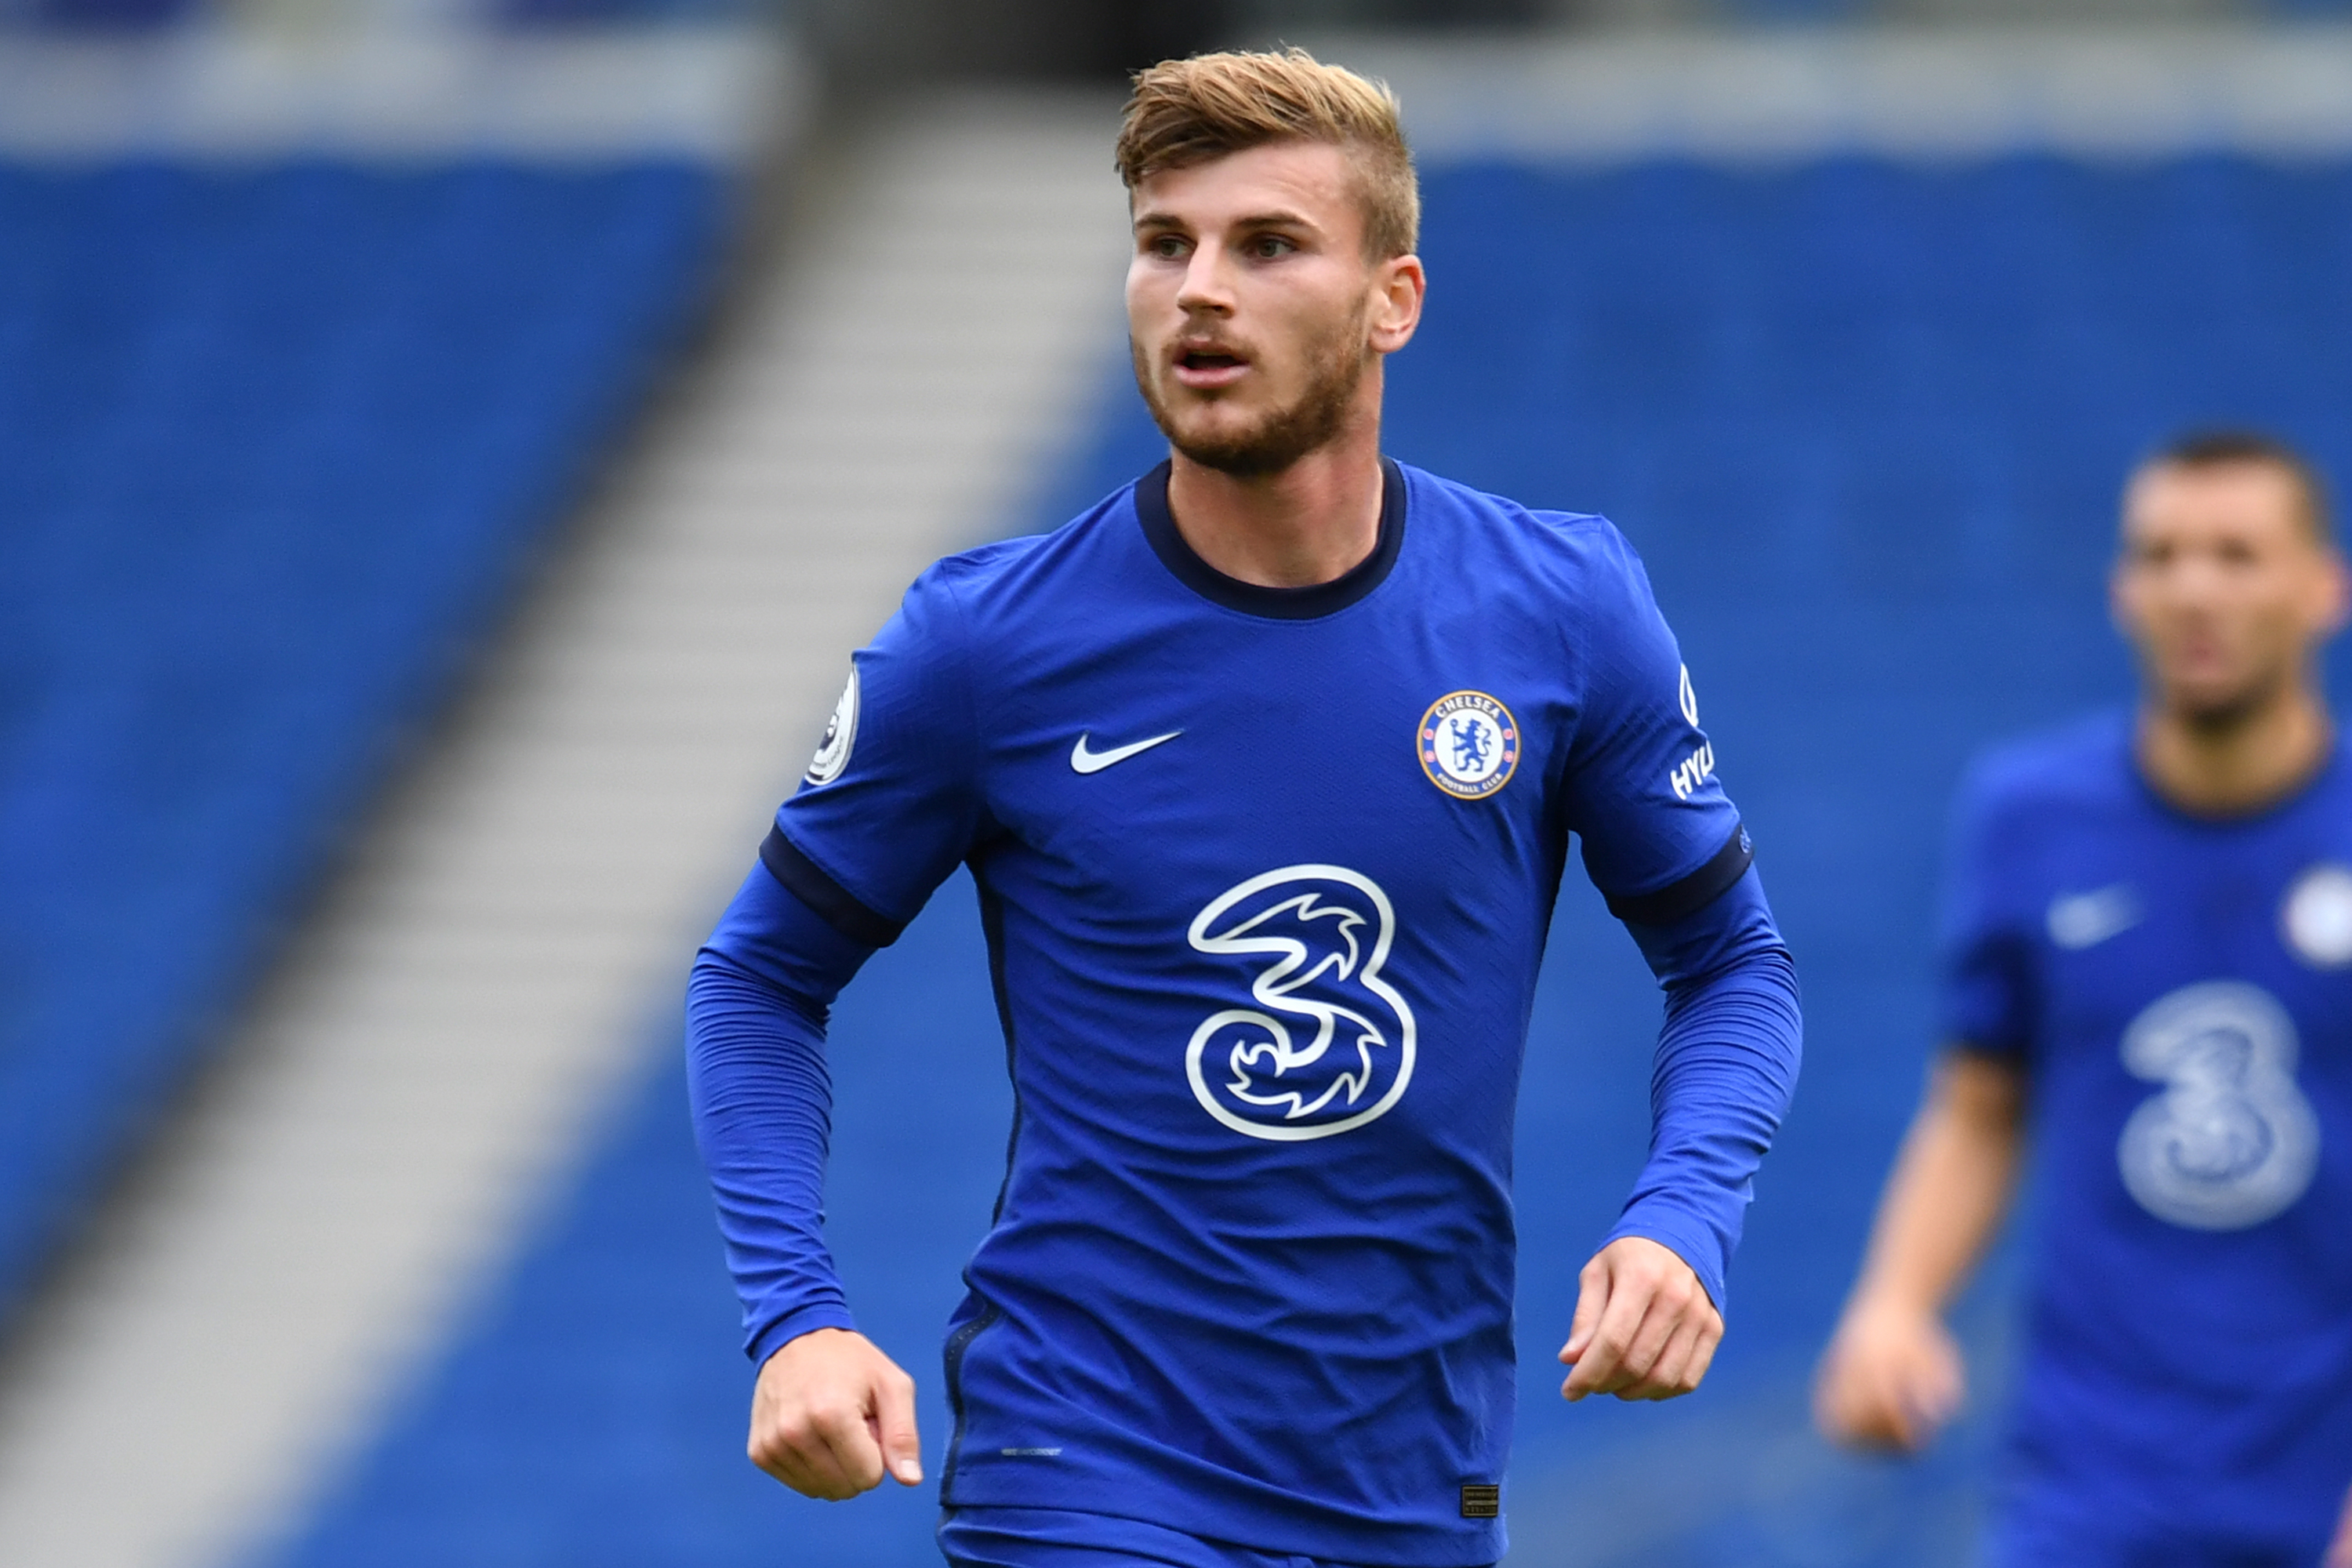 Werner already talking Chelsea tactics with Lampard to catch Man City, Liverpool